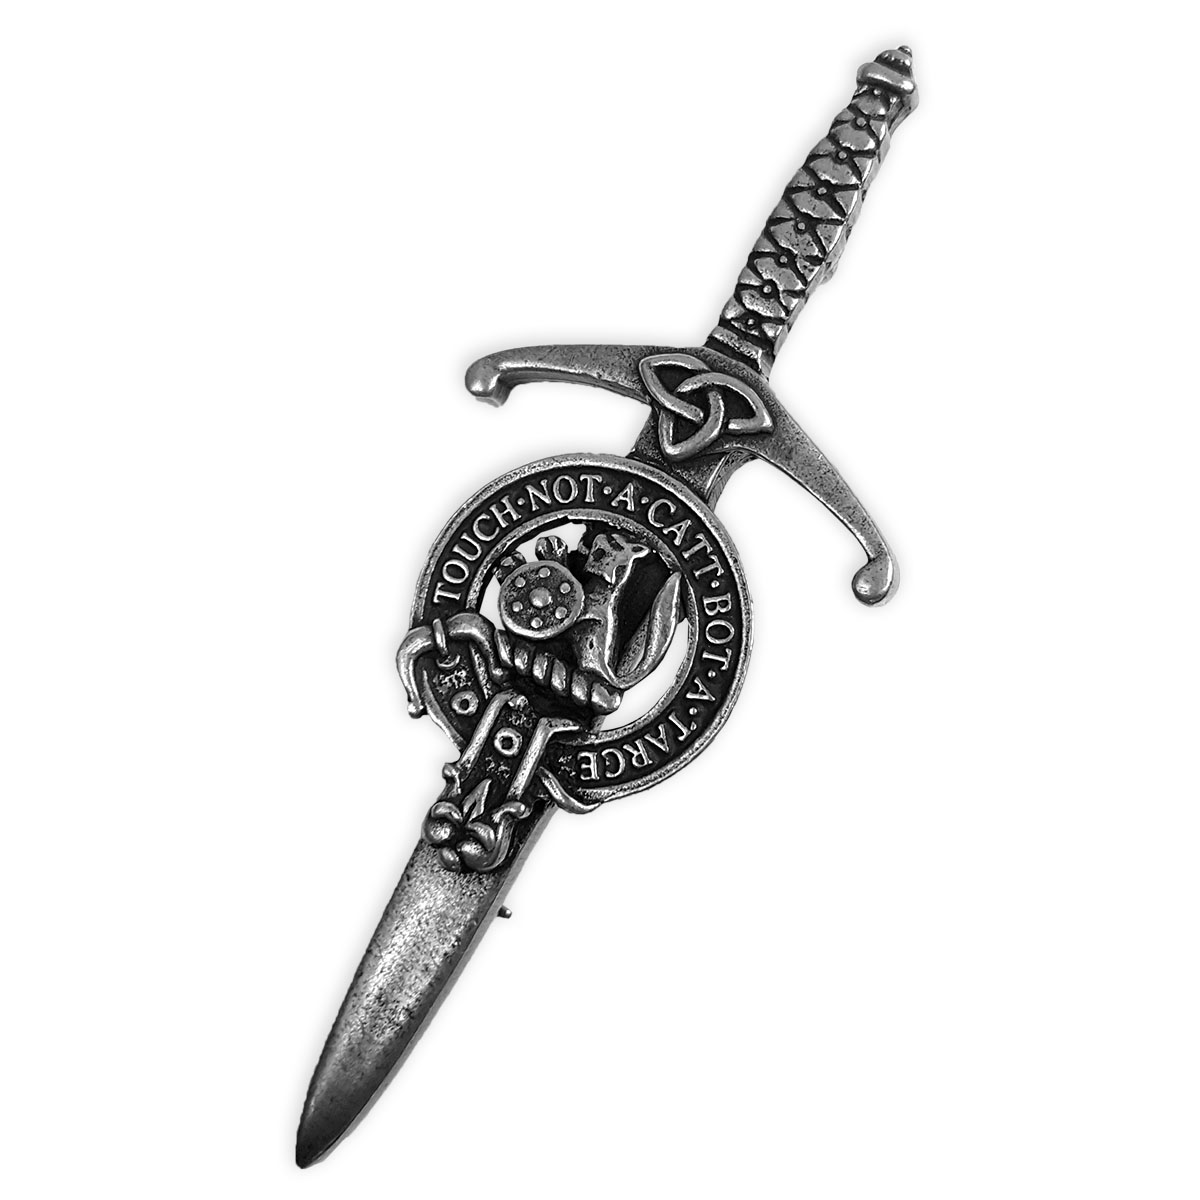 New Clan Crest Rhodium Finish Kilt Pin 148 Clans To Choose From 